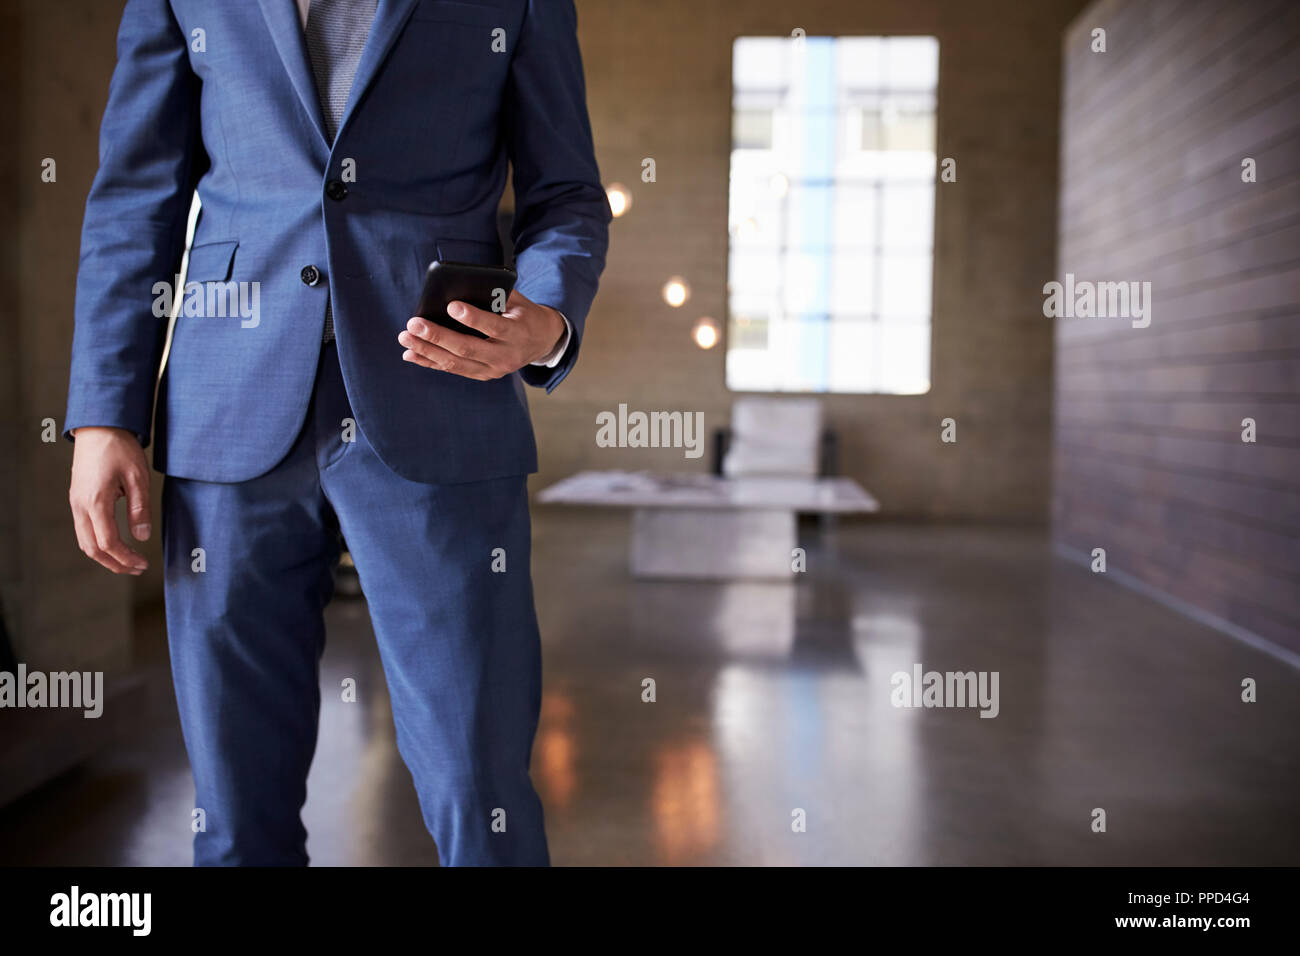 Mid section of man in blue suit using smartphone Stock Photo